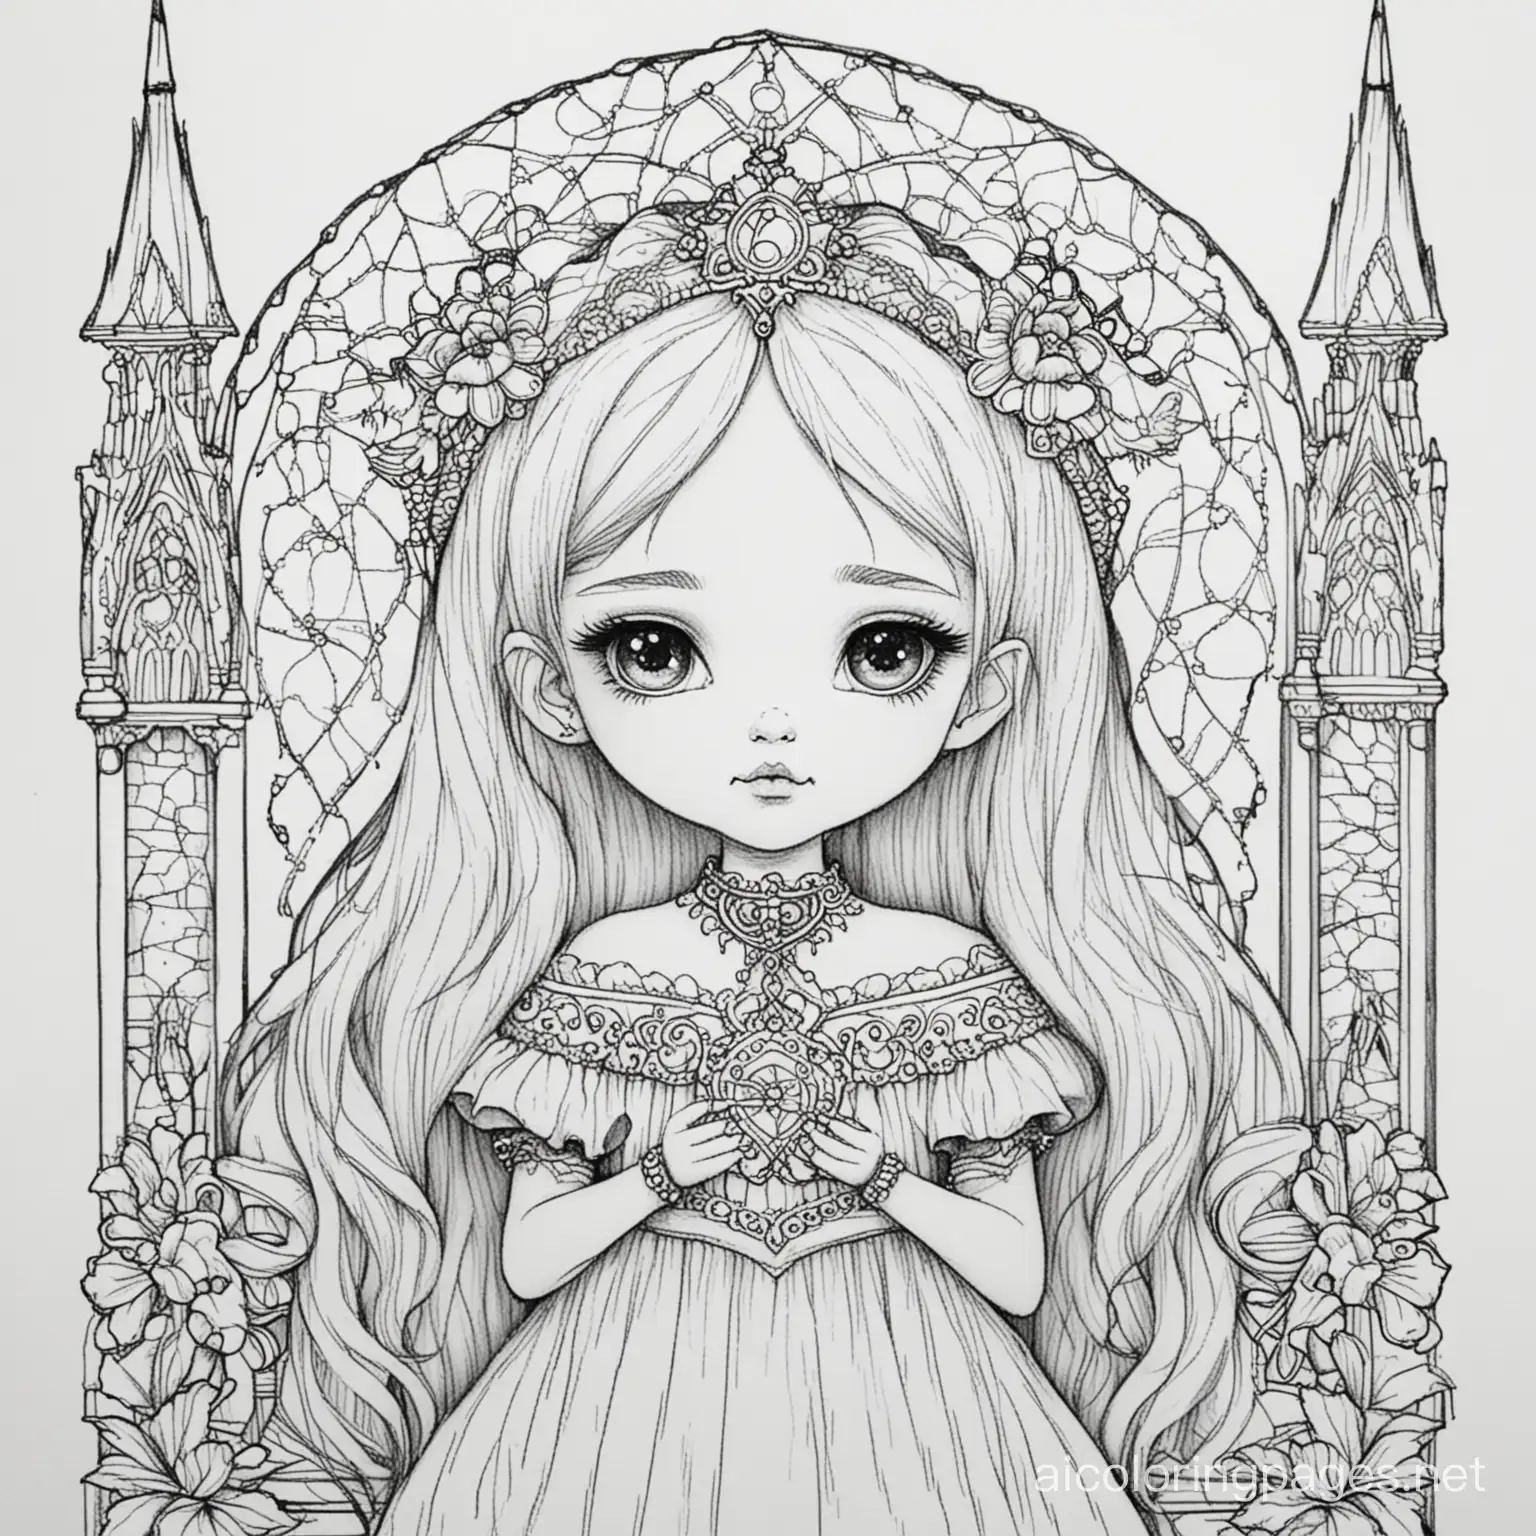 gothic, Coloring Page, black and white, line art, white background, Simplicity, Ample White Space. The background of the coloring page is plain white to make it easy for young children to color within the lines. The outlines of all the subjects are easy to distinguish, making it simple for kids to color without too much difficulty